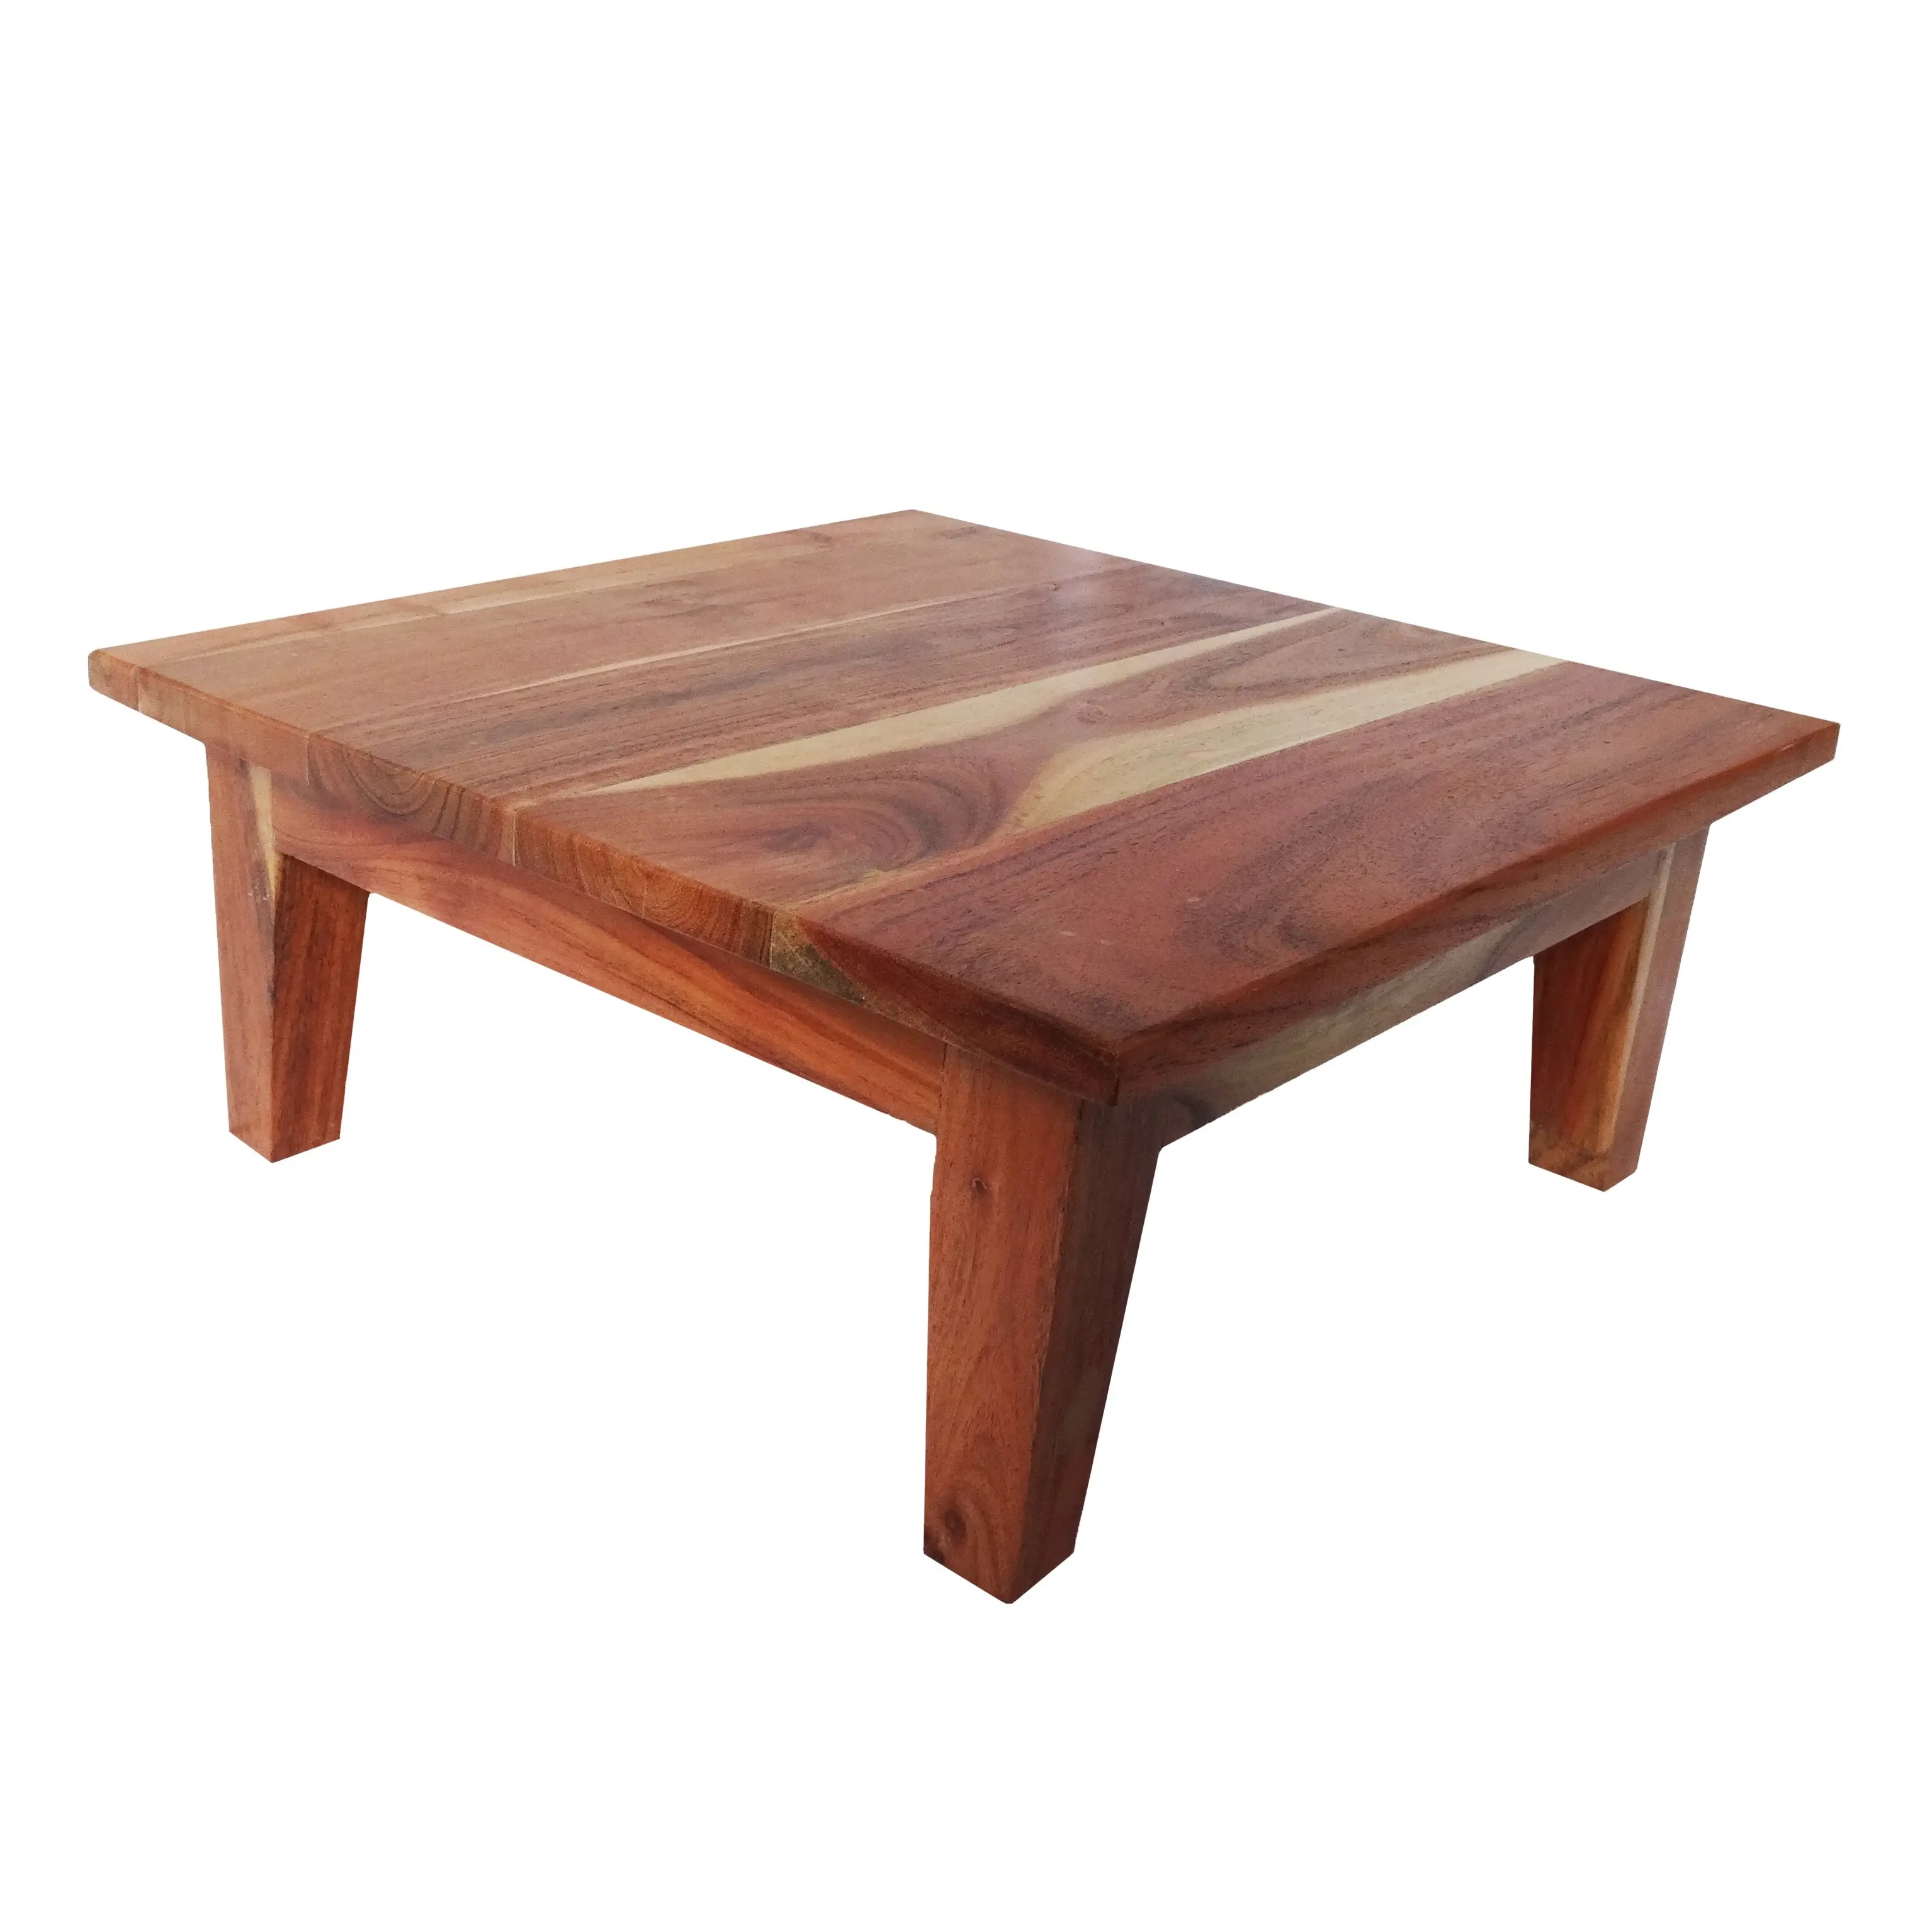 Acacia Wood Footstool Handmade Natural Wooden Low Height Foot Stool 41 (L) x 41 (W) x 16 (H) cm Size Square Shape Step Stool